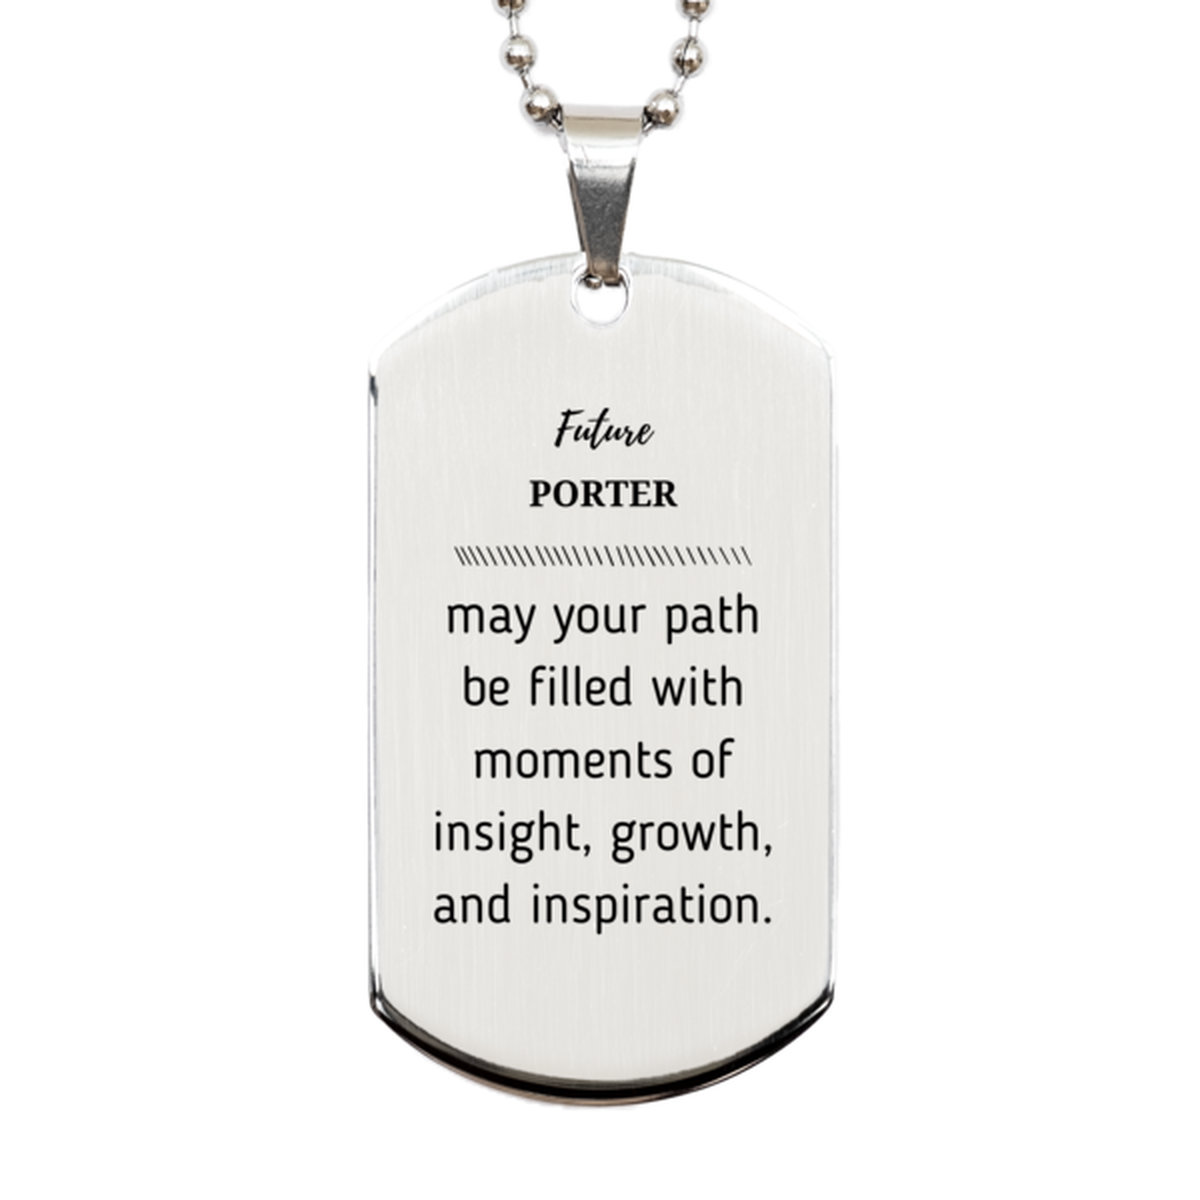 Future Porter Gifts, May your path be filled with moments of insight, Graduation Gifts for New Porter, Christmas Unique Silver Dog Tag For Men, Women, Friends